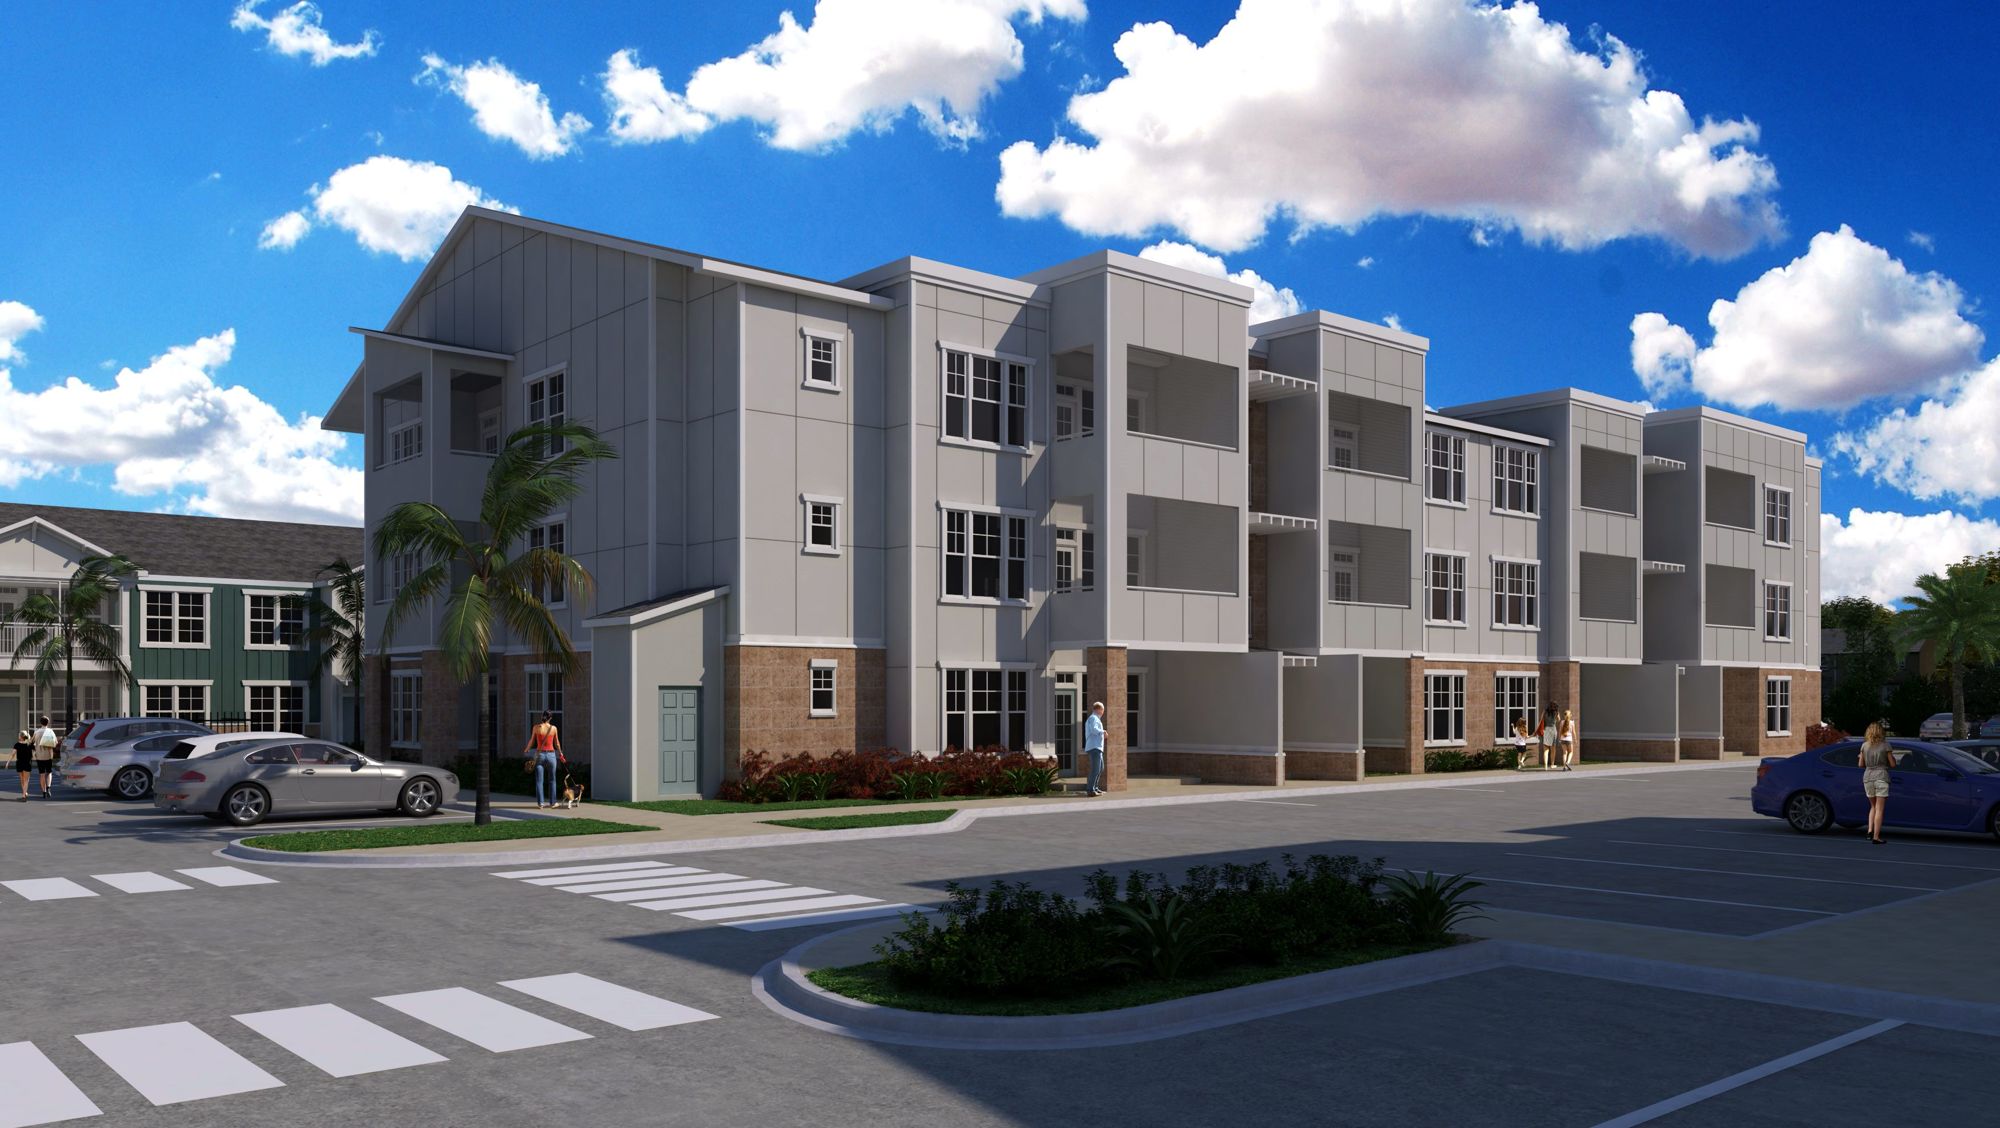 The 250-unit community will comprise nine residential buildings.